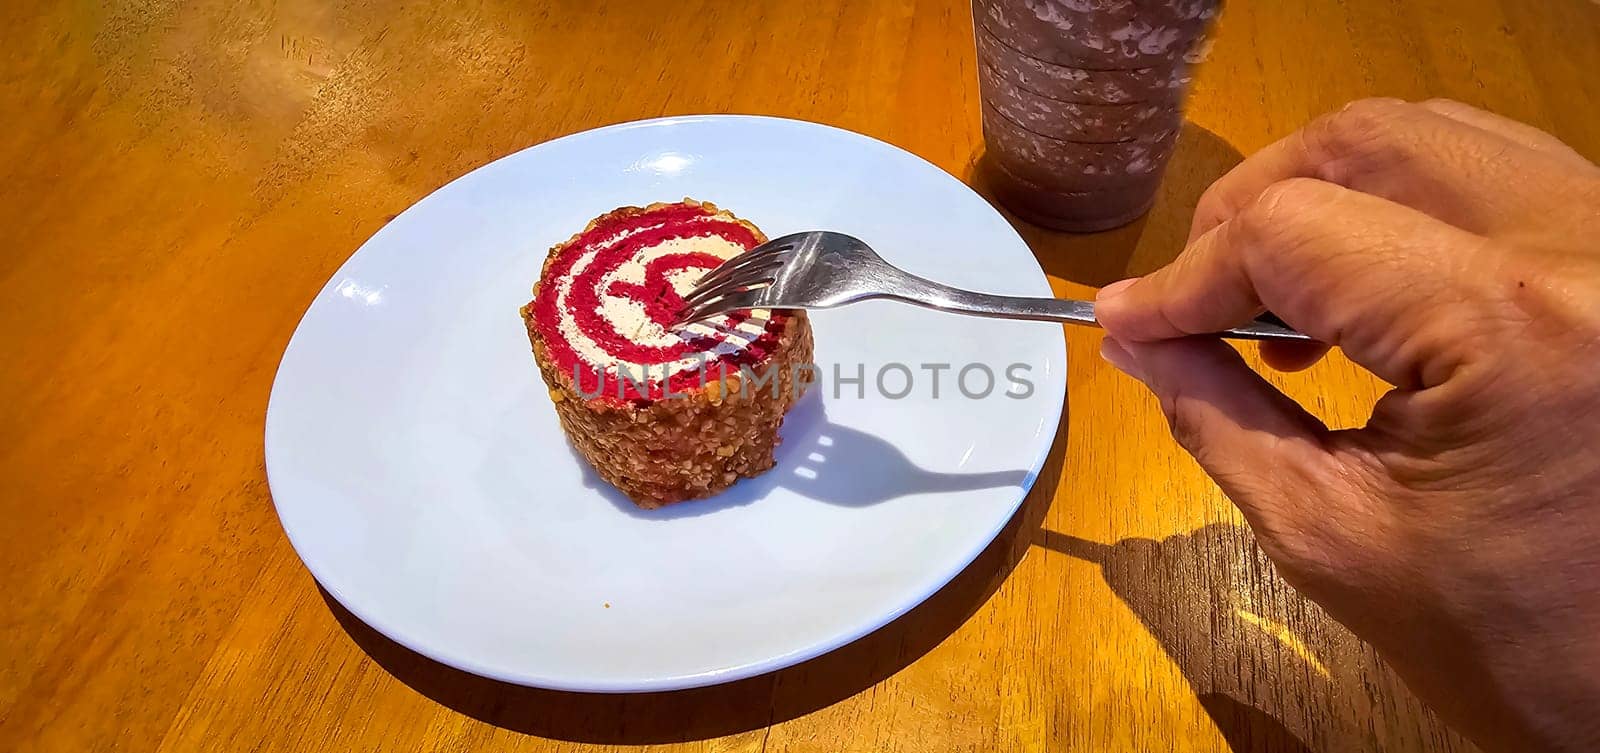 Red Velvet Roll Cake with candied peanuts shred topping for cooking content ideas by antoksena